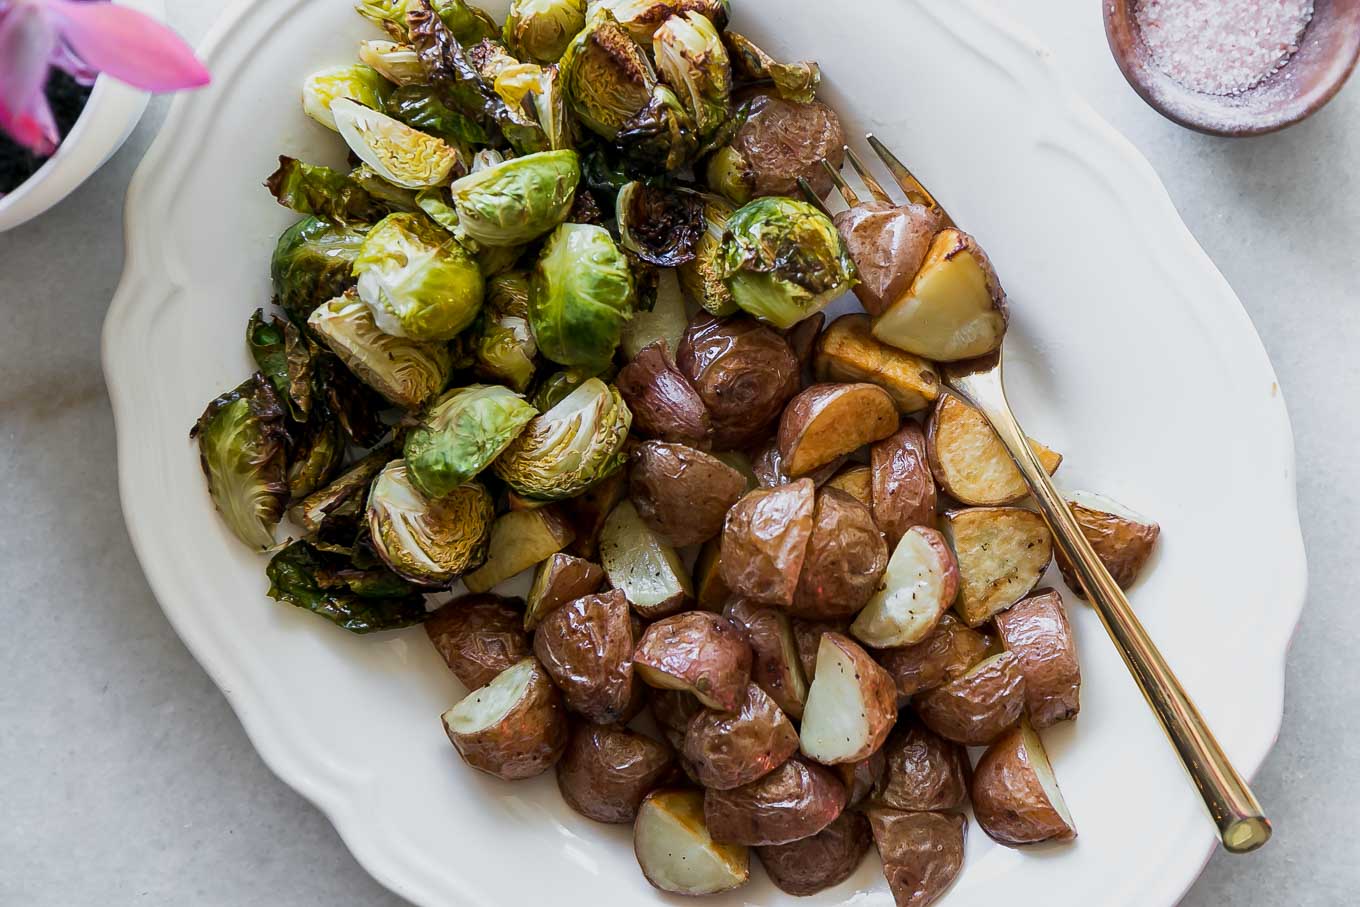 roasted potatoes and brussels sprouts on a white side dish